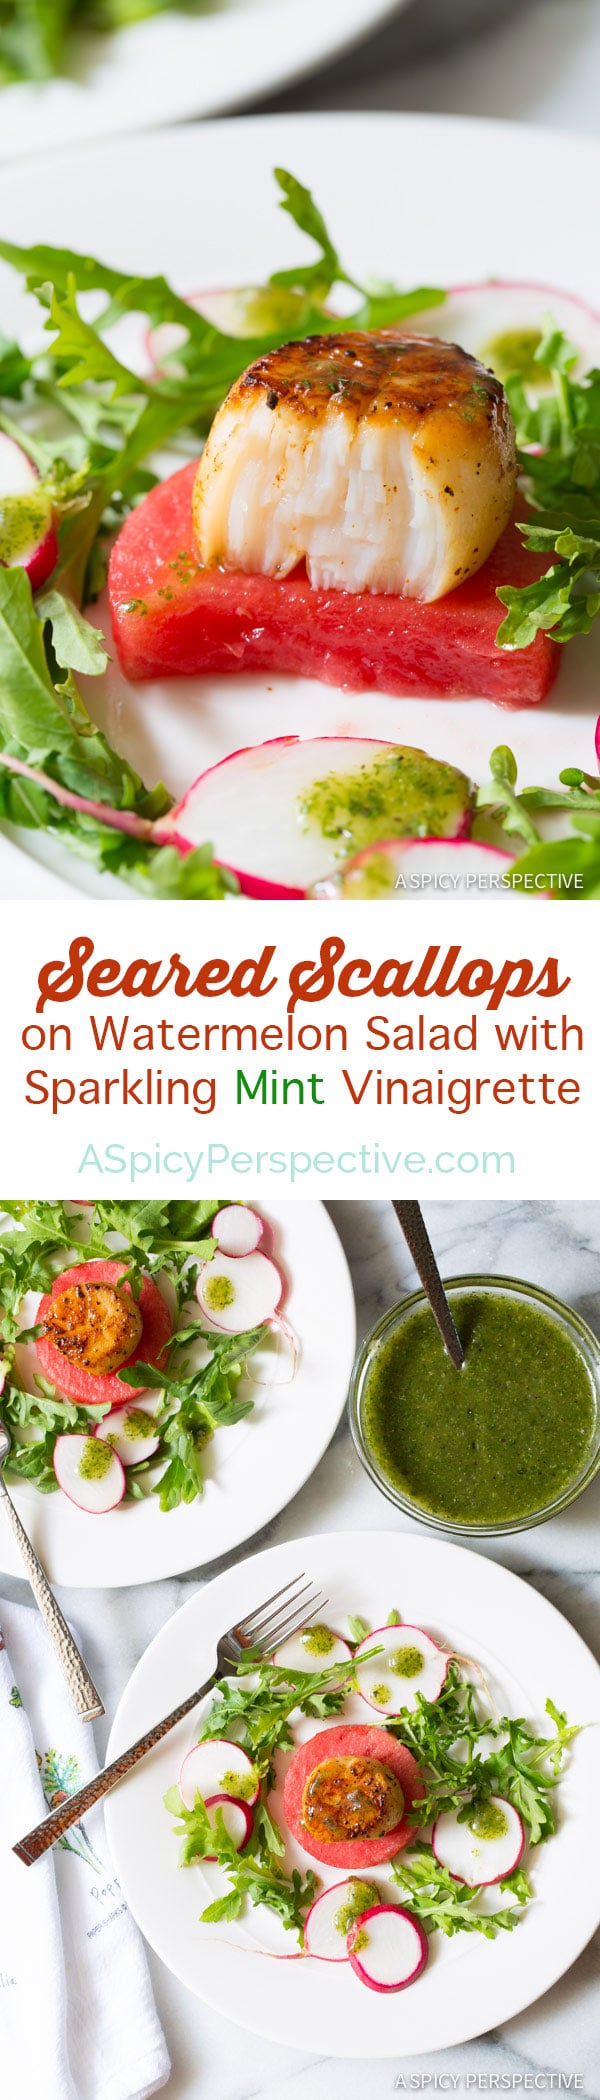 Seared scallops on watermelon salad with sparkling mint vinaigrette